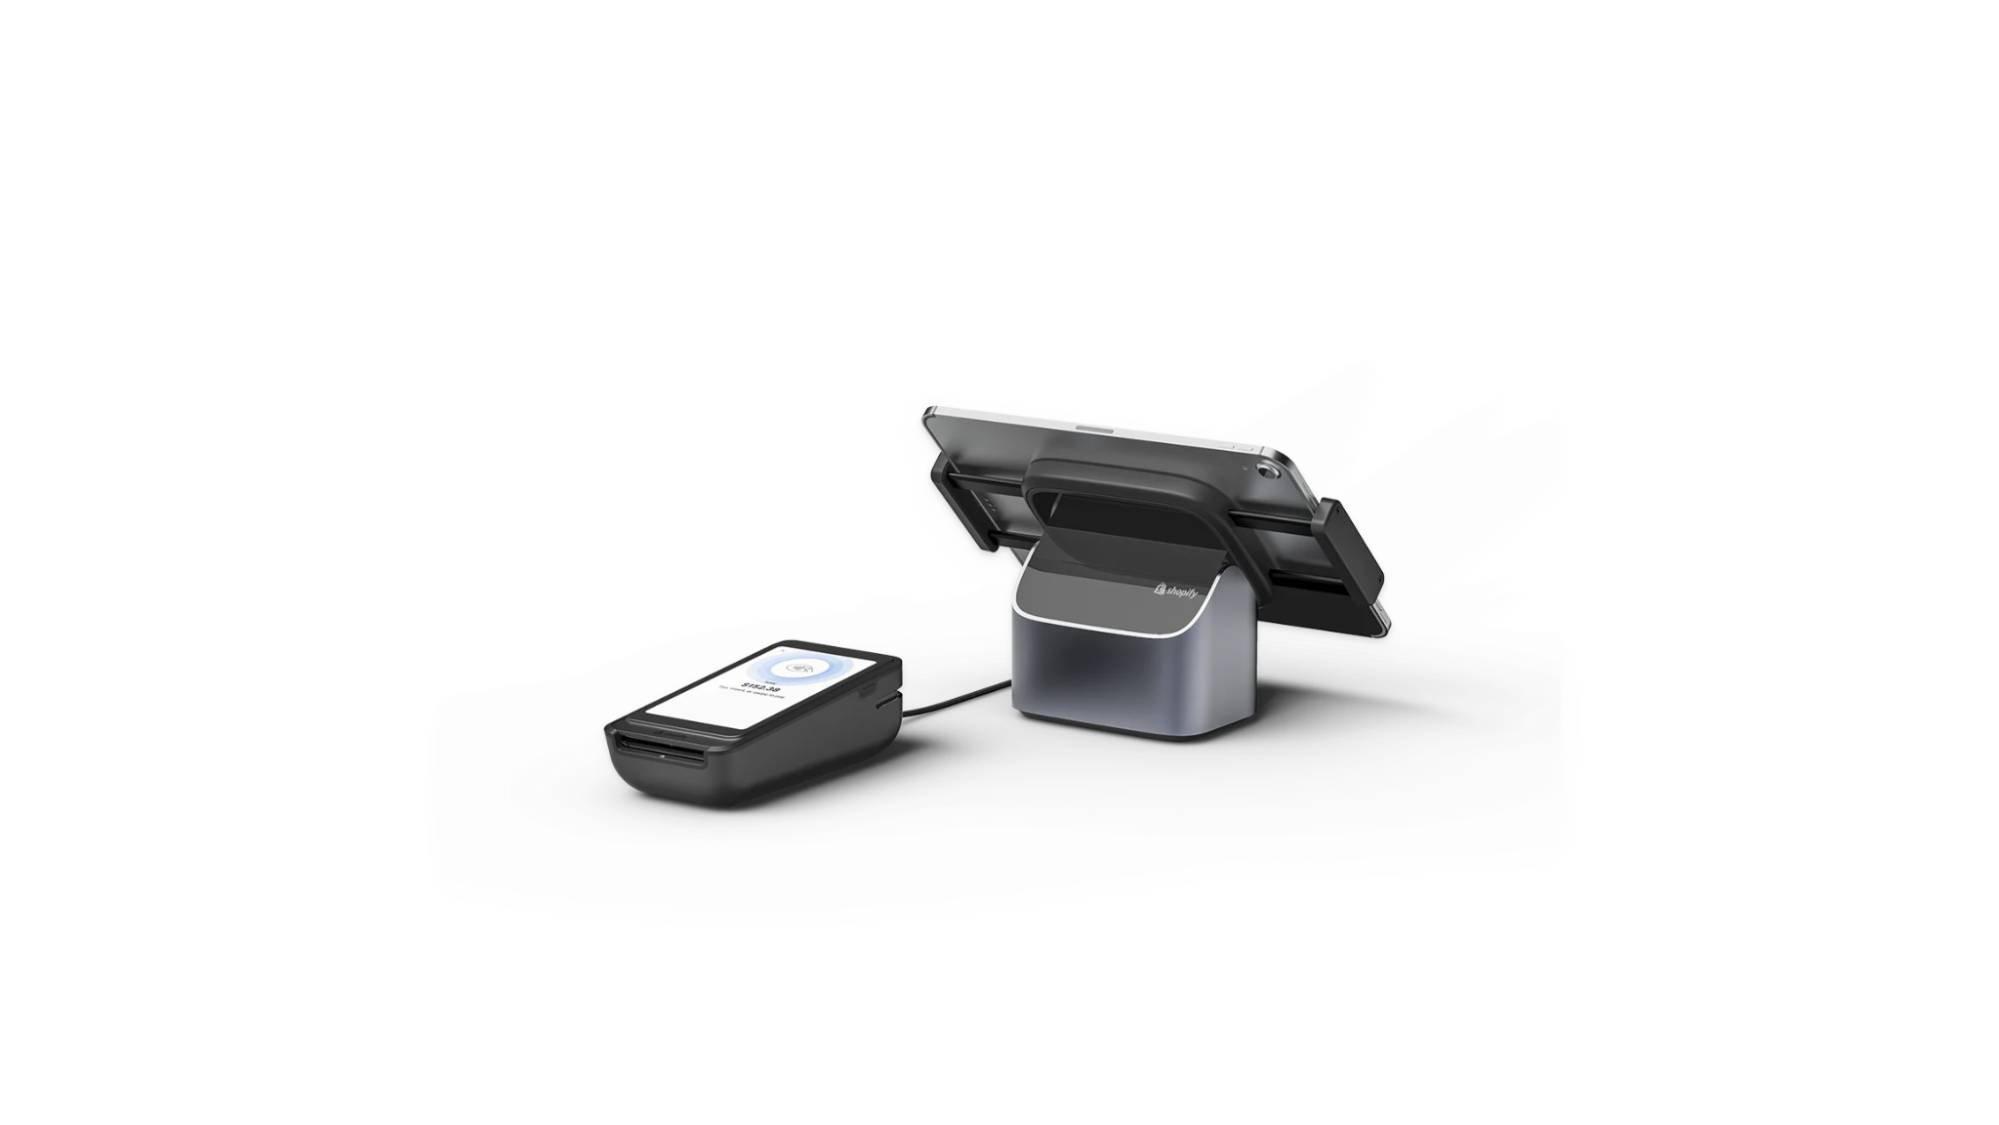 A countertop POS terminal offered in Shopify’s hardware store